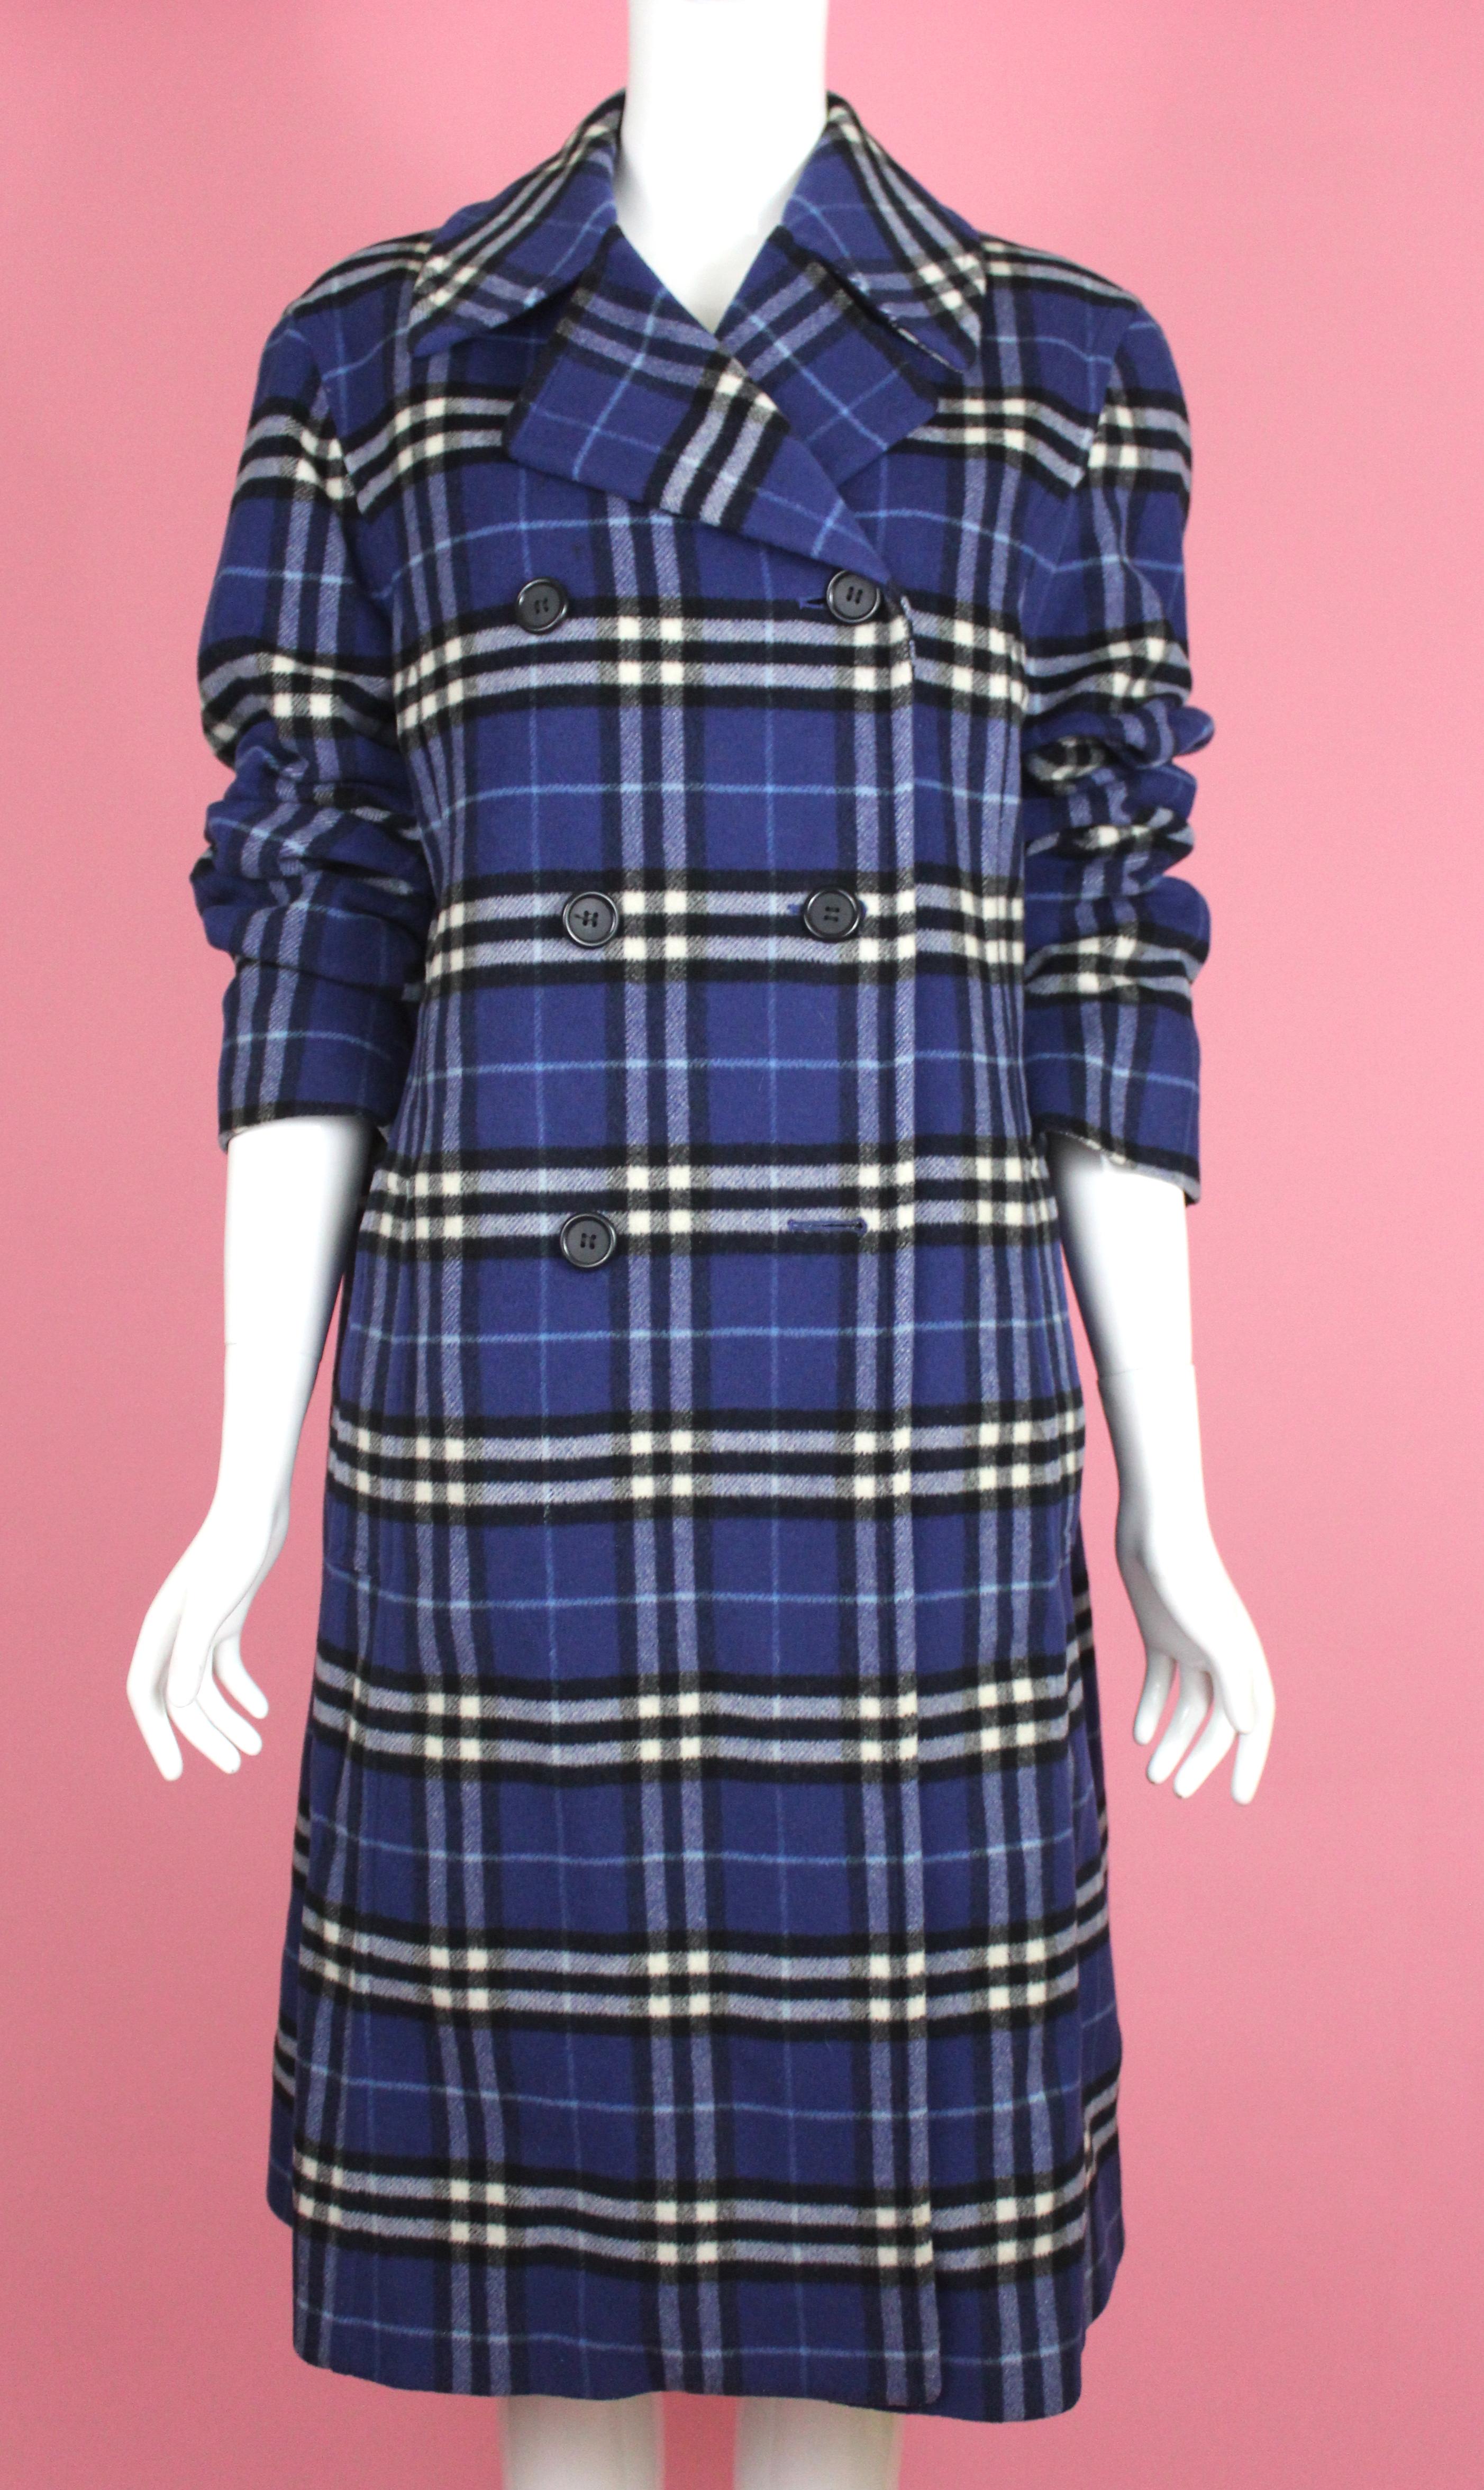 -Burberry double breasted coat in blue check
-Made in England
-Wool / cashmere blend 
-No size tag, best fitting a size 6 US (please see measurements below) 

Approx. Measurements: 
Total length: 41